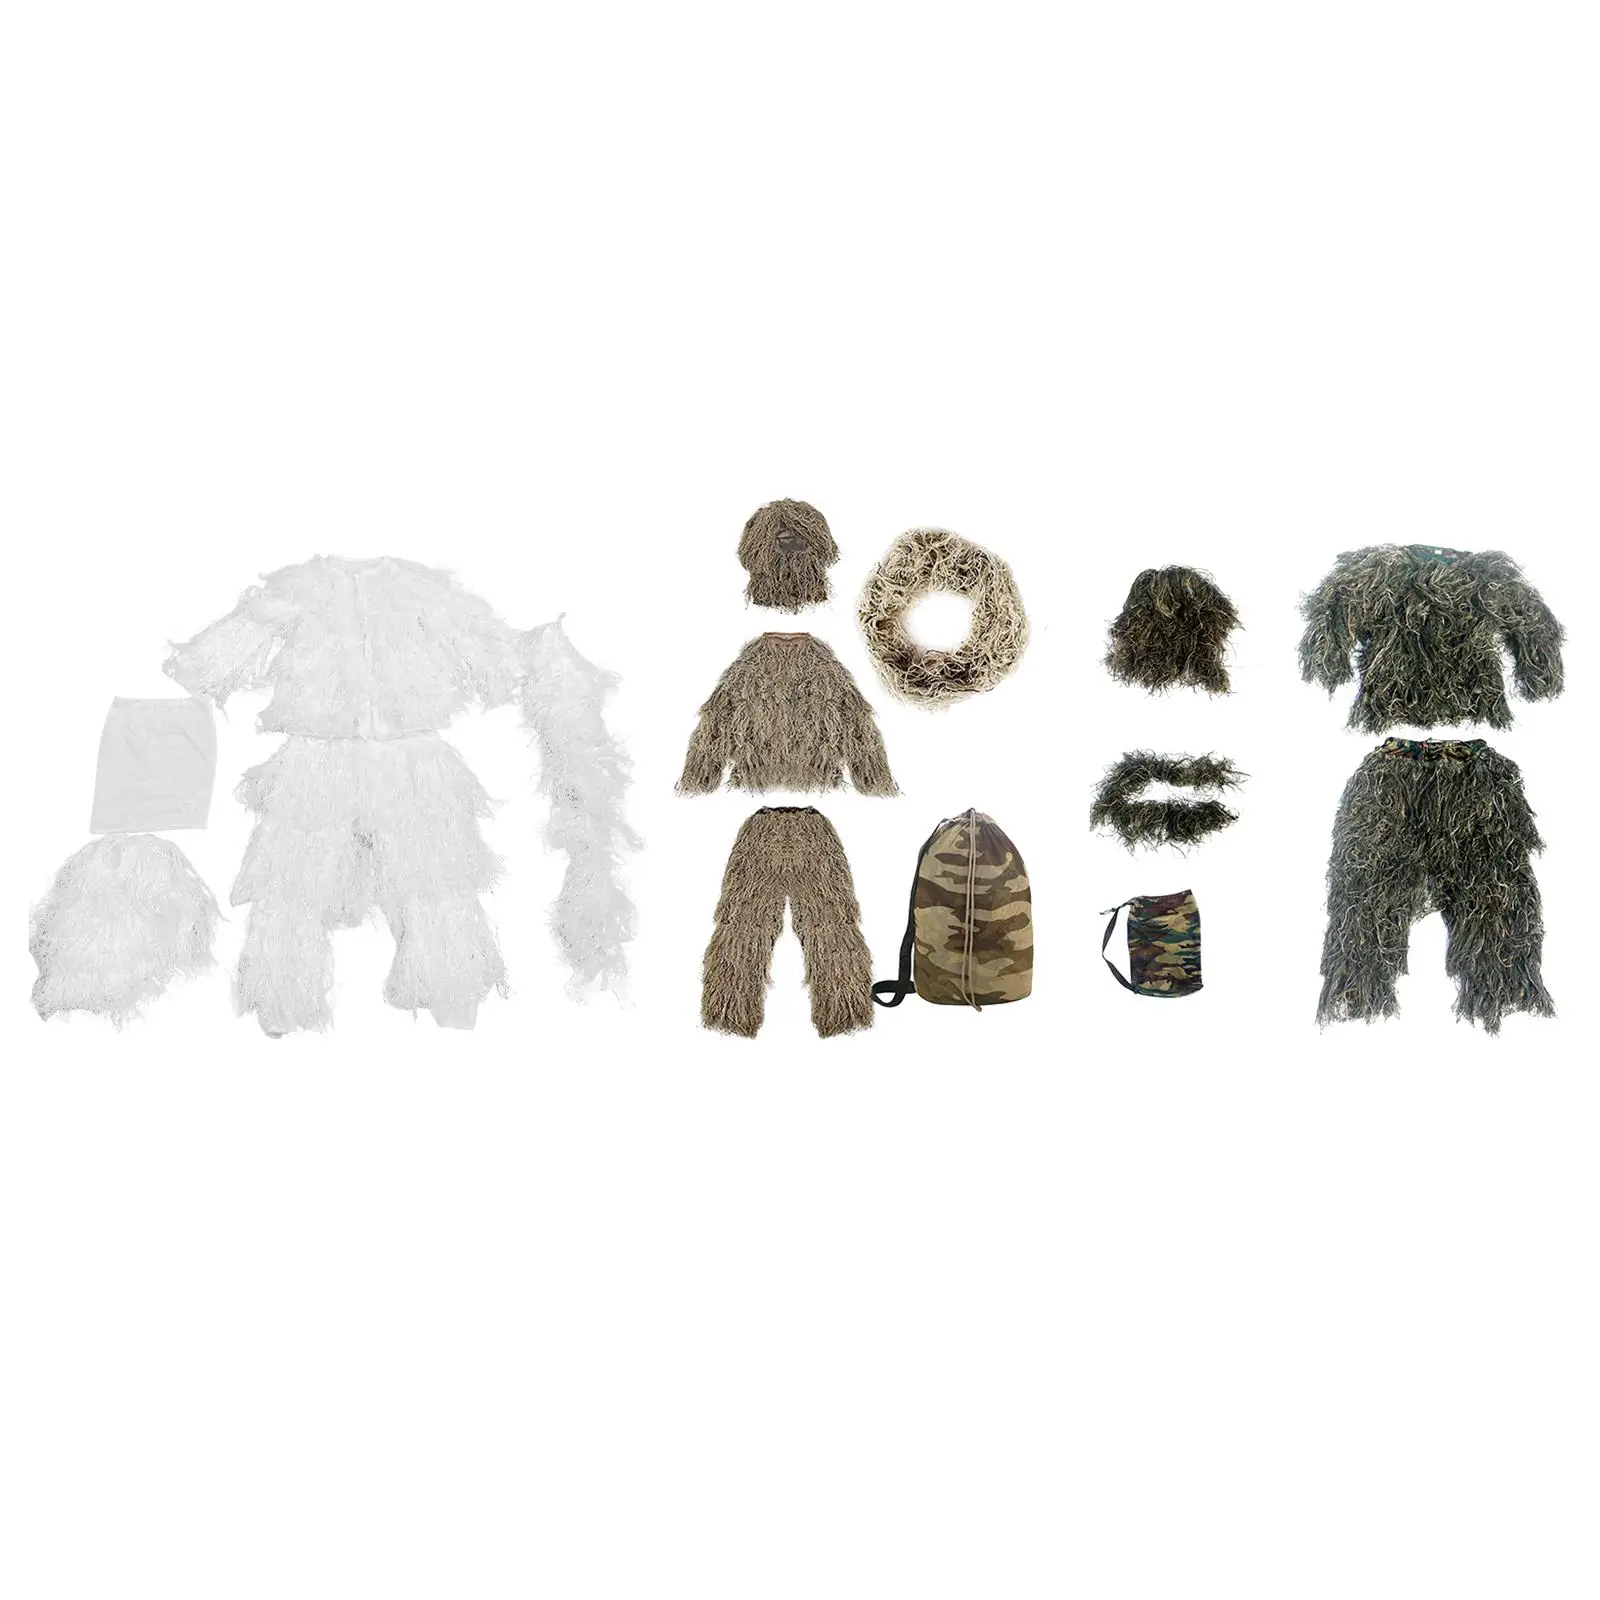 Ghillie Suit for Men Breathable Jacket Uniform Set for Party Costume Hunting